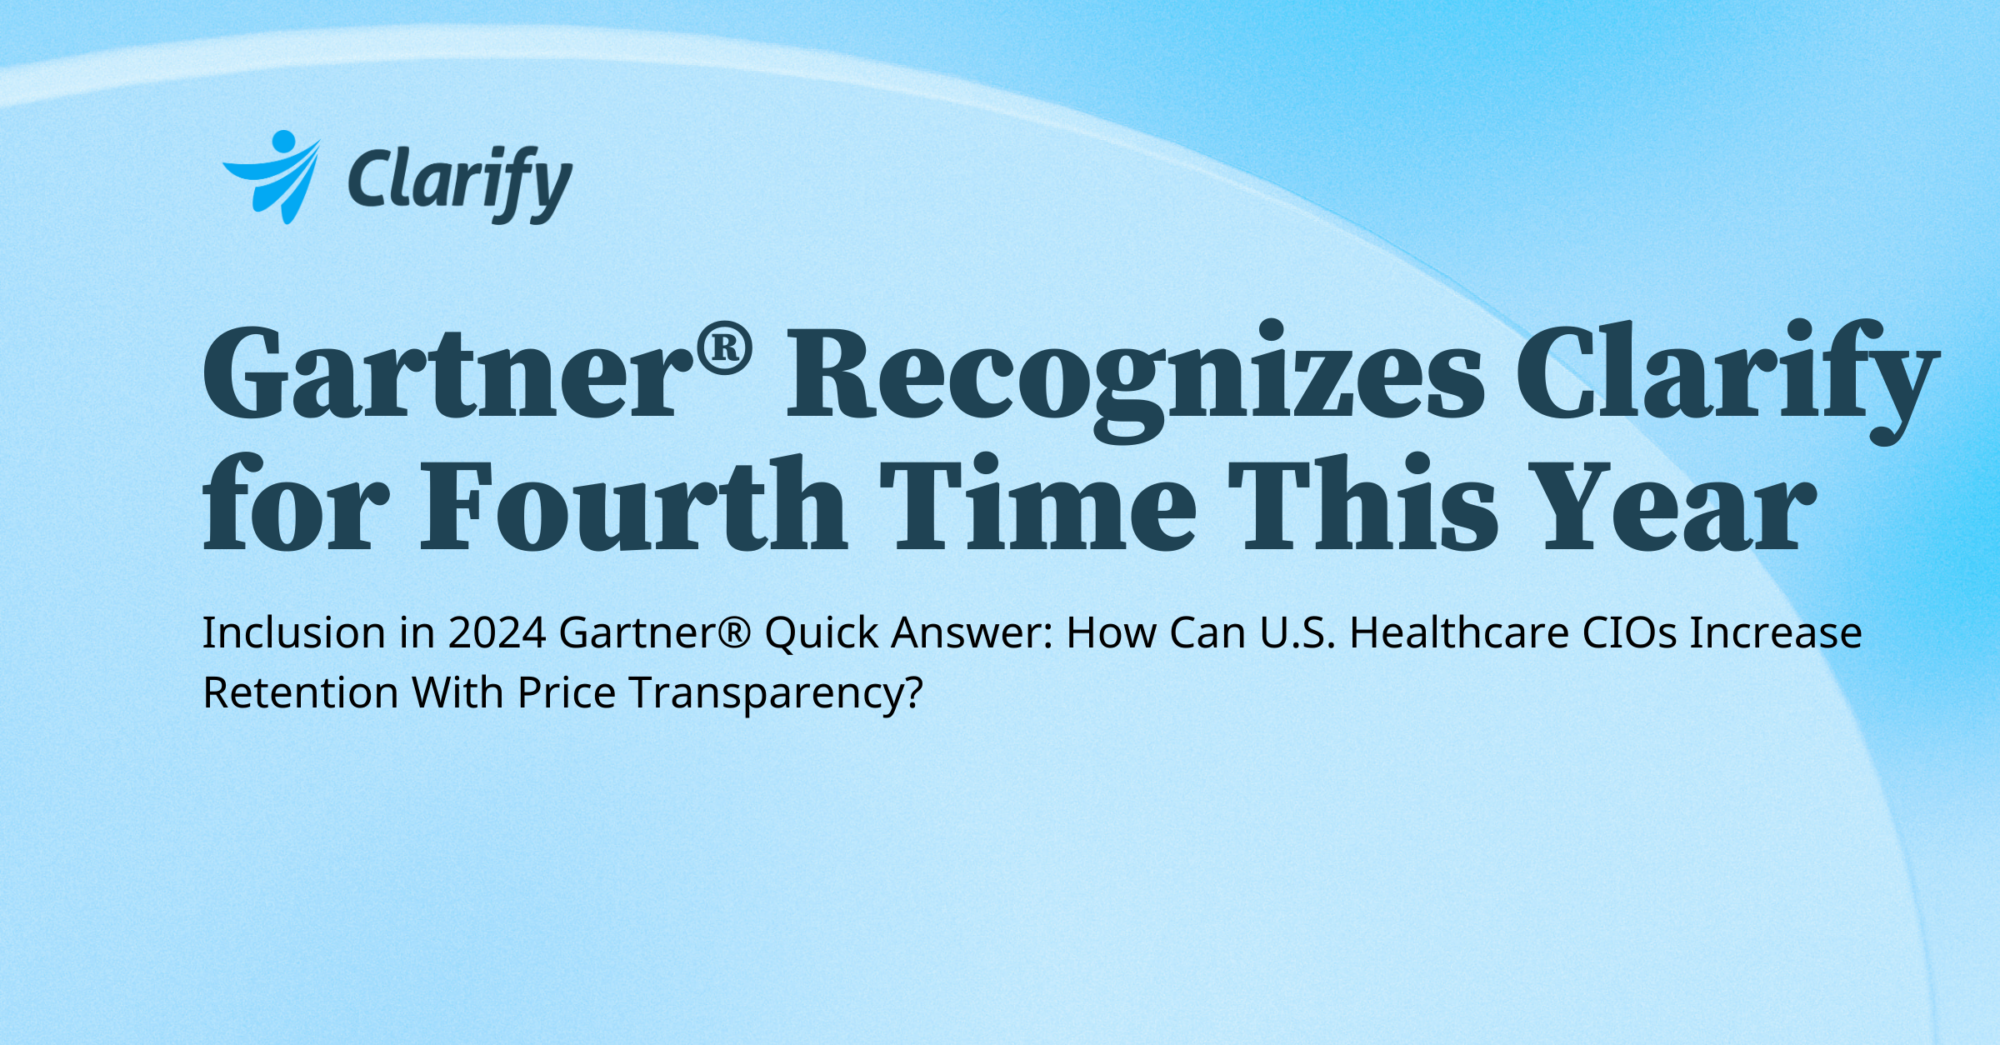 Thumbnail for Clarify Health Included in 2024 Gartner® Quick Answer: How Can U.S. Healthcare CIOs Increase Retention With Price Transparency? 